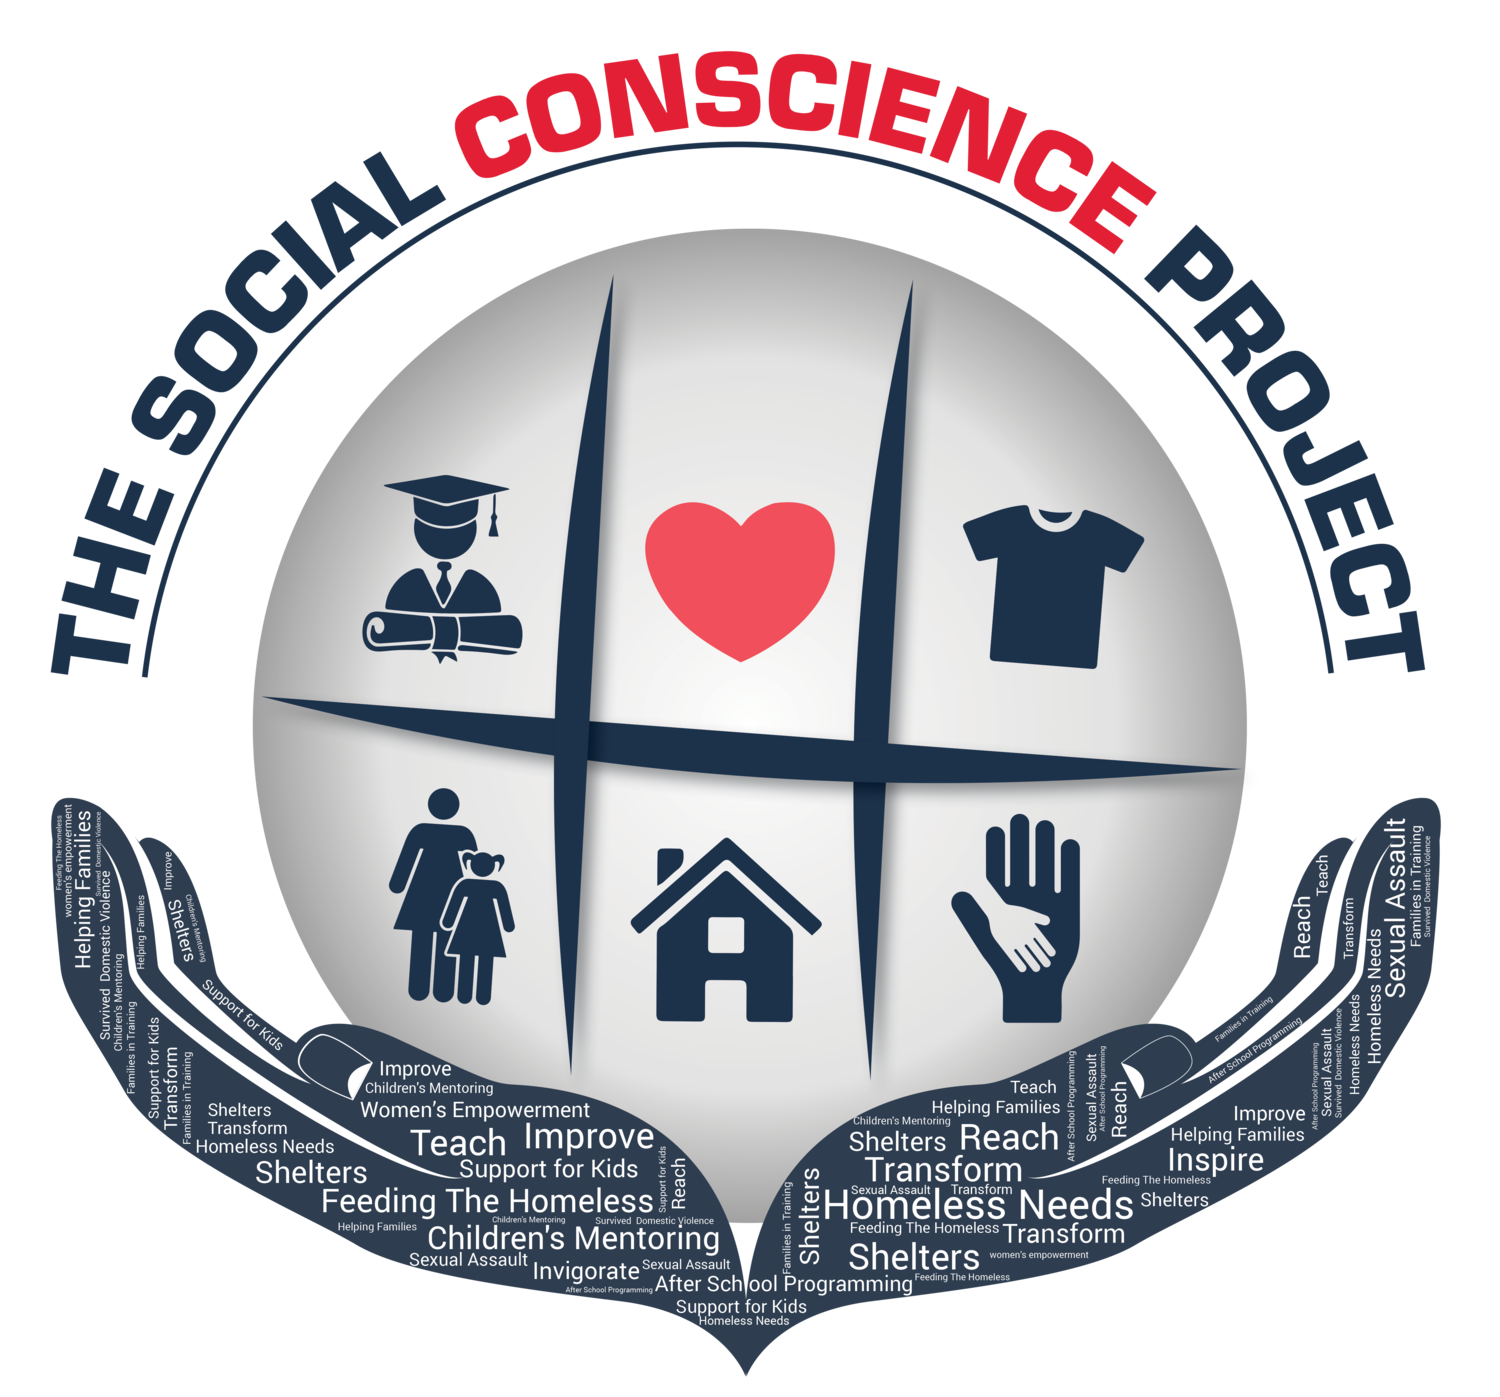 The Social Conscience Project